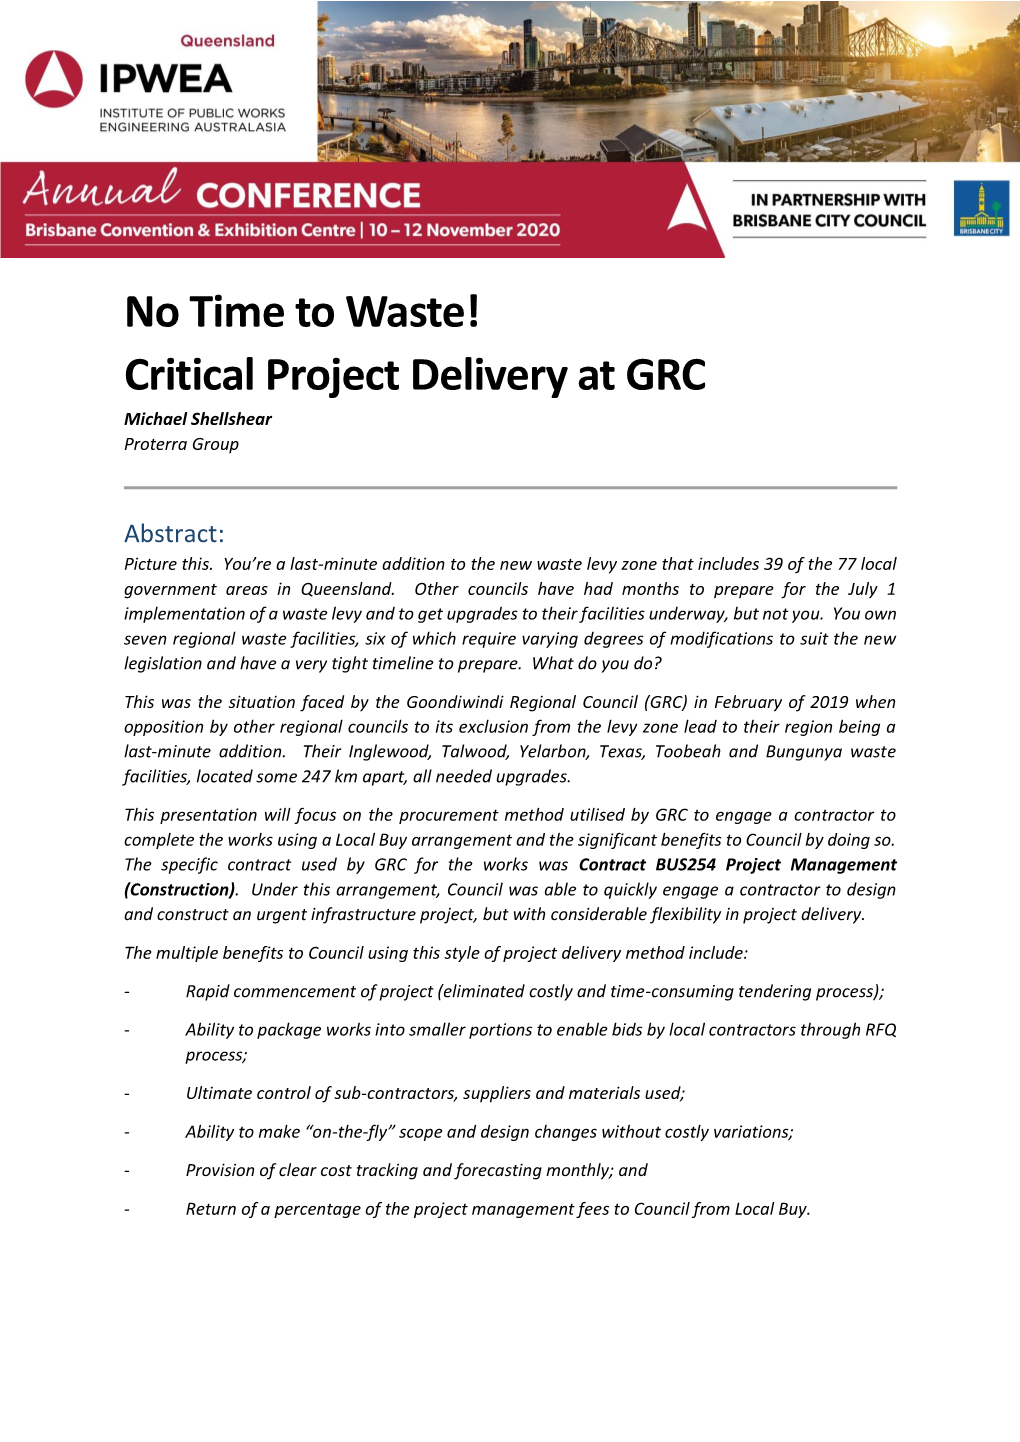 No Time to Waste! Critical Project Delivery at GRC Michael Shellshear Proterra Group